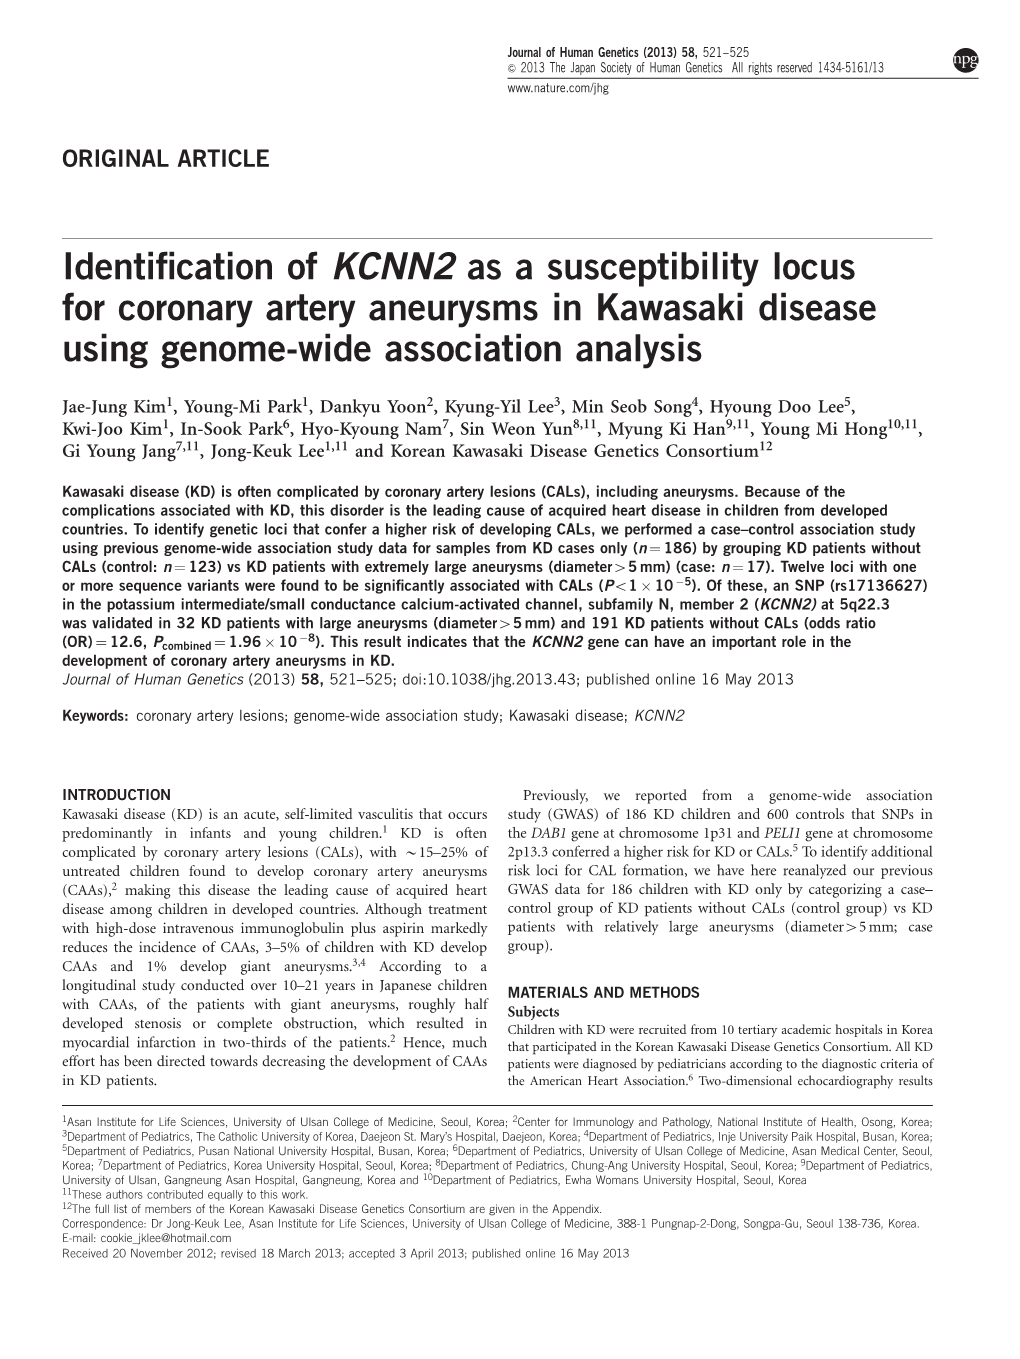 Identification of KCNN2 As a Susceptibility Locus for Coronary